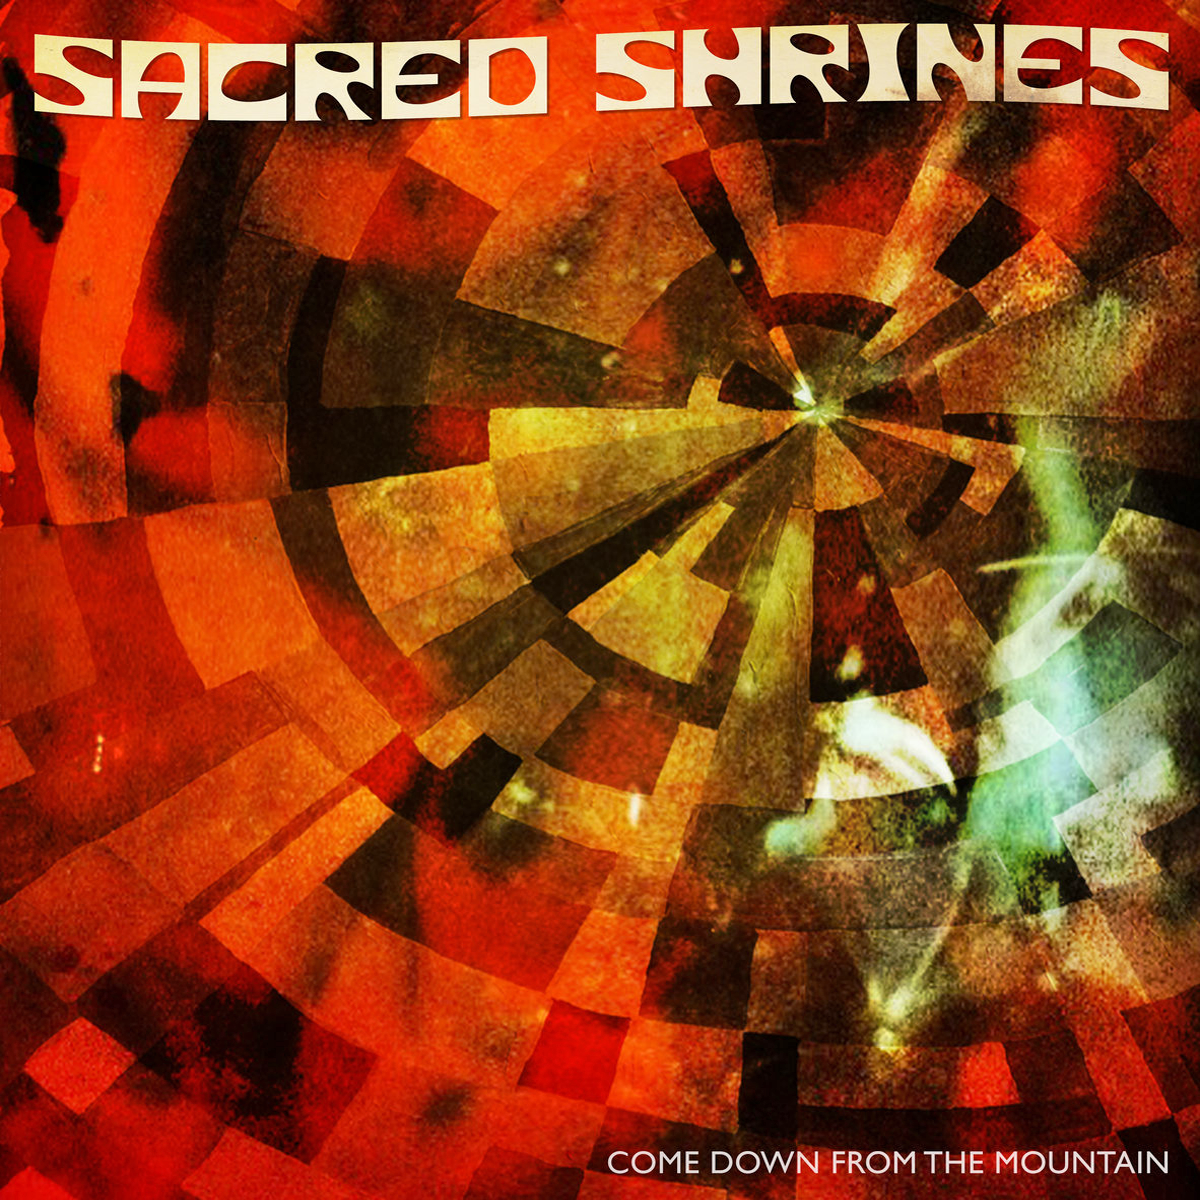 Sacred Shrines- Come Down From The Mountain LP ~KILLER / RARE MIDNIGHT BLACK WAX LTD TO 100!